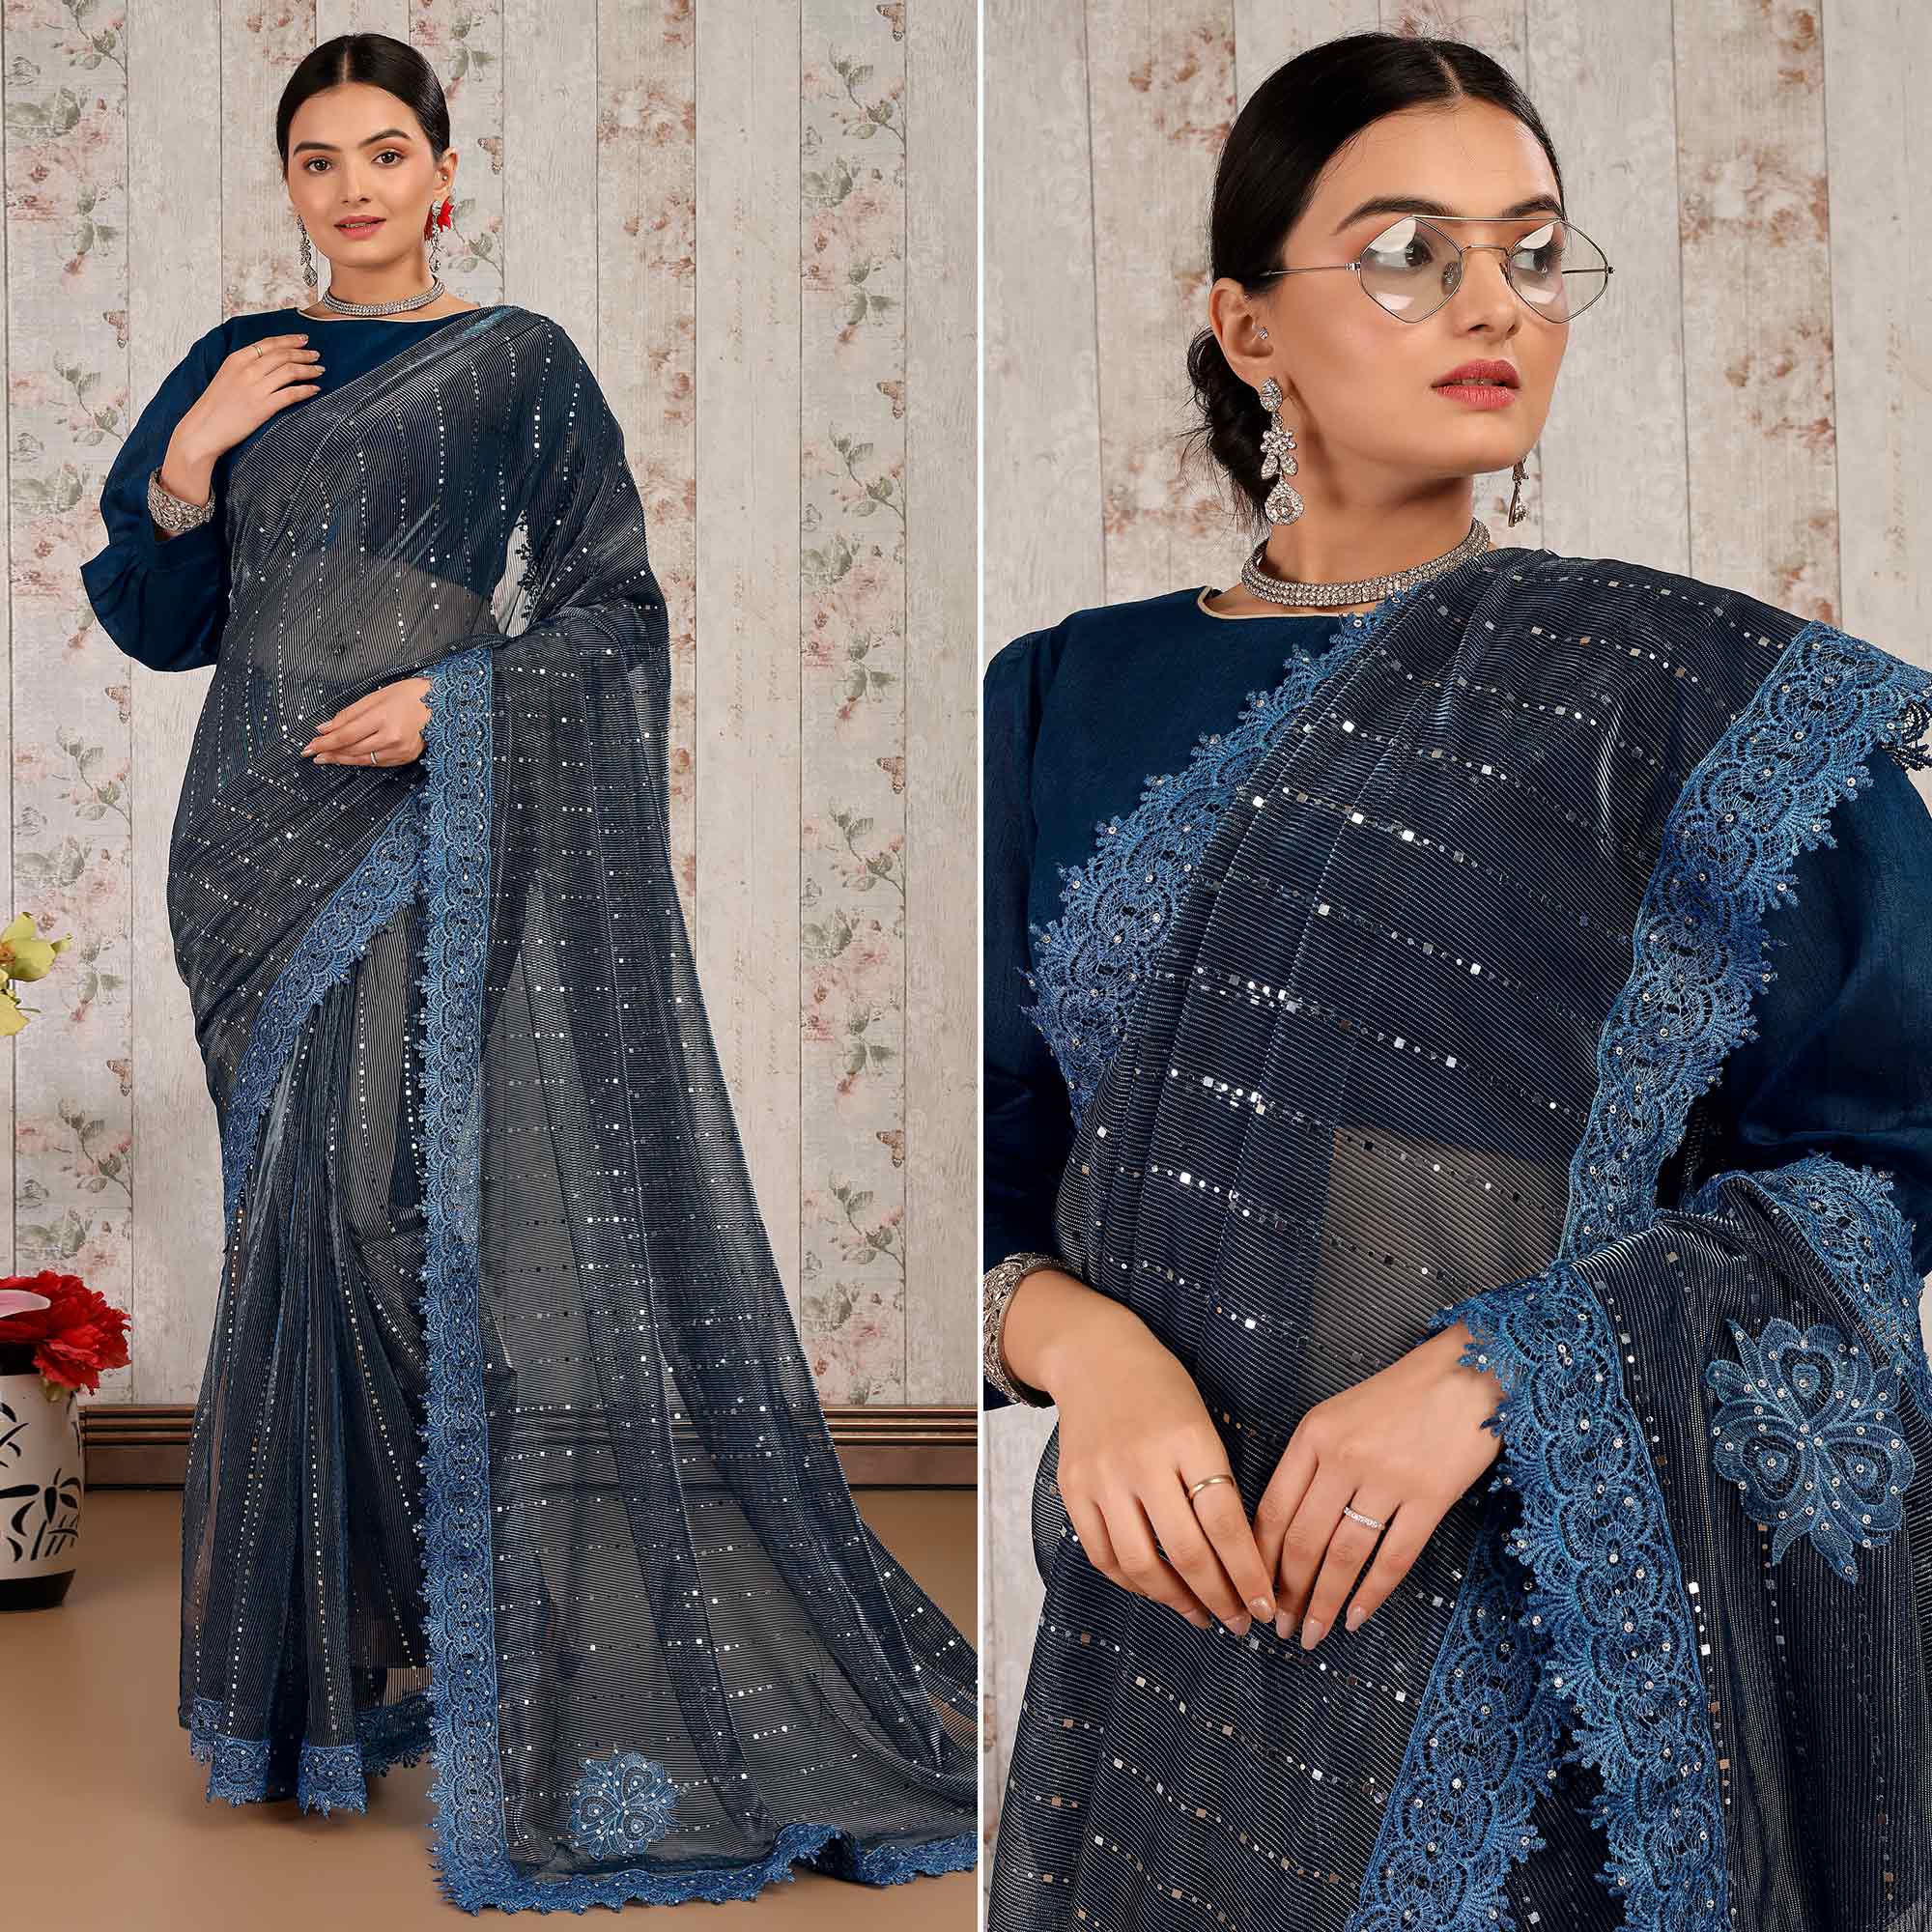 Blue Tikali Work Lycra Saree With Embroidered Lace Border